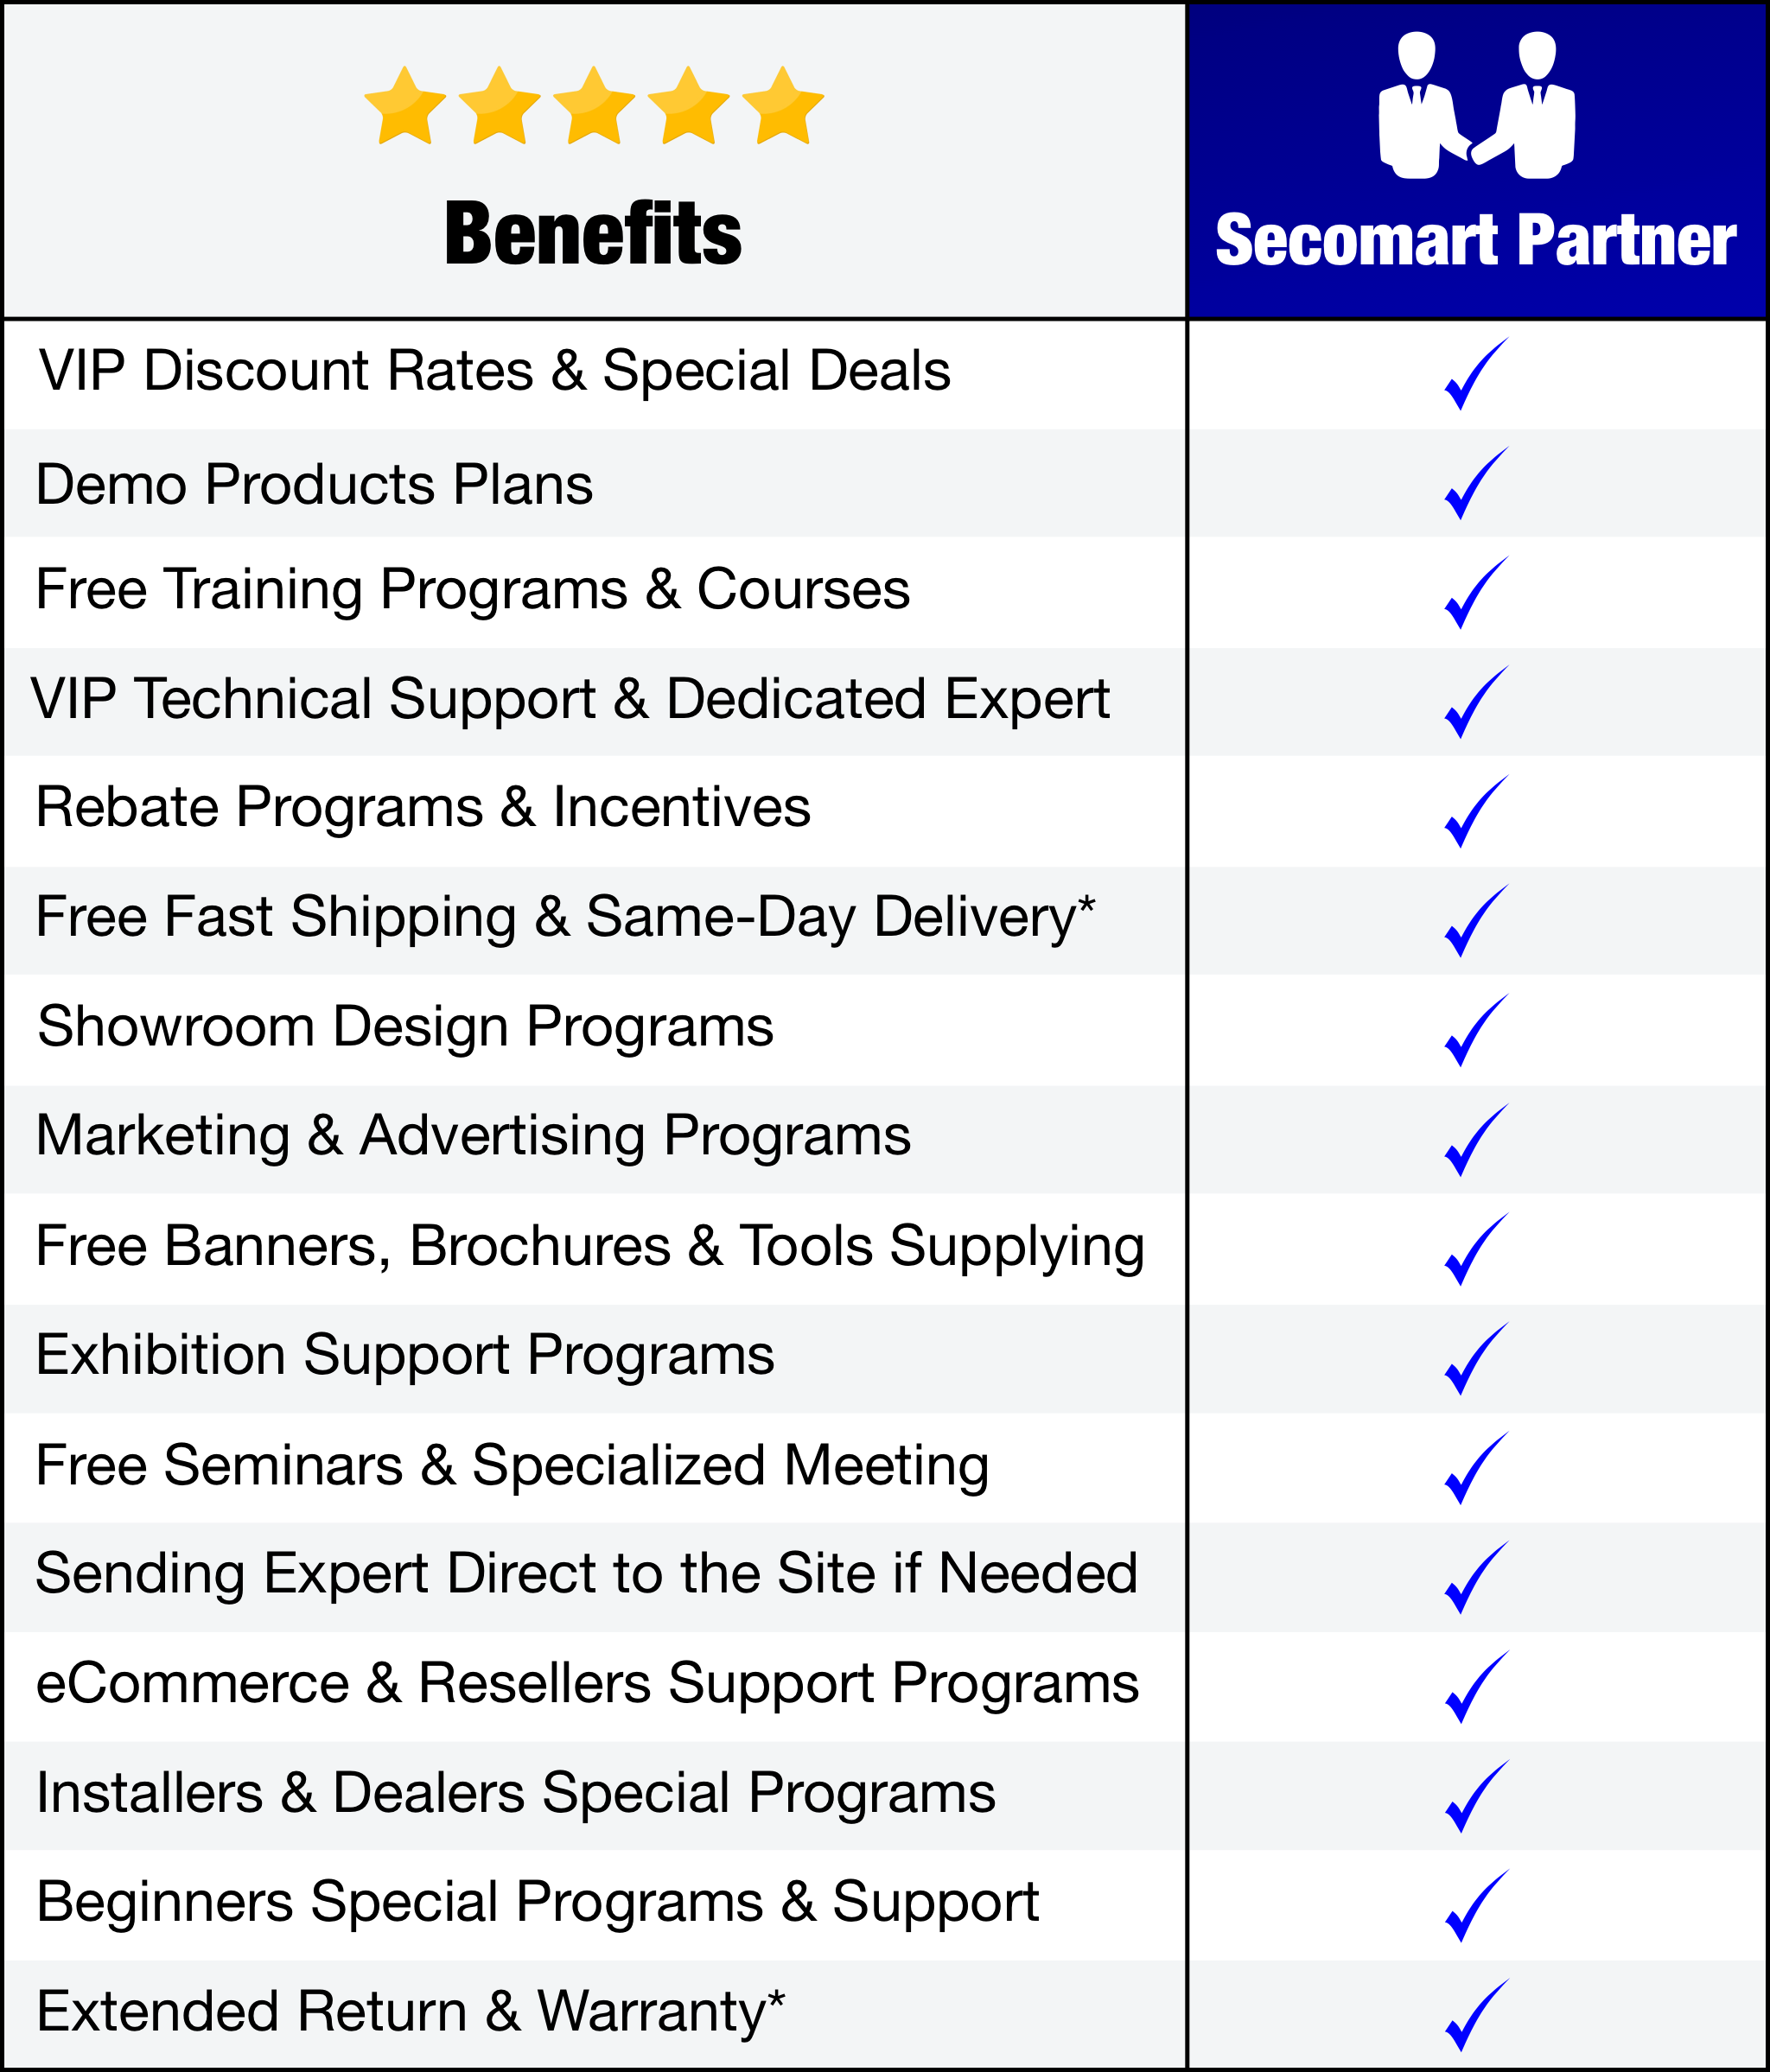 Become a Secomart business partner today and take advantage of these partner benefits and offers.